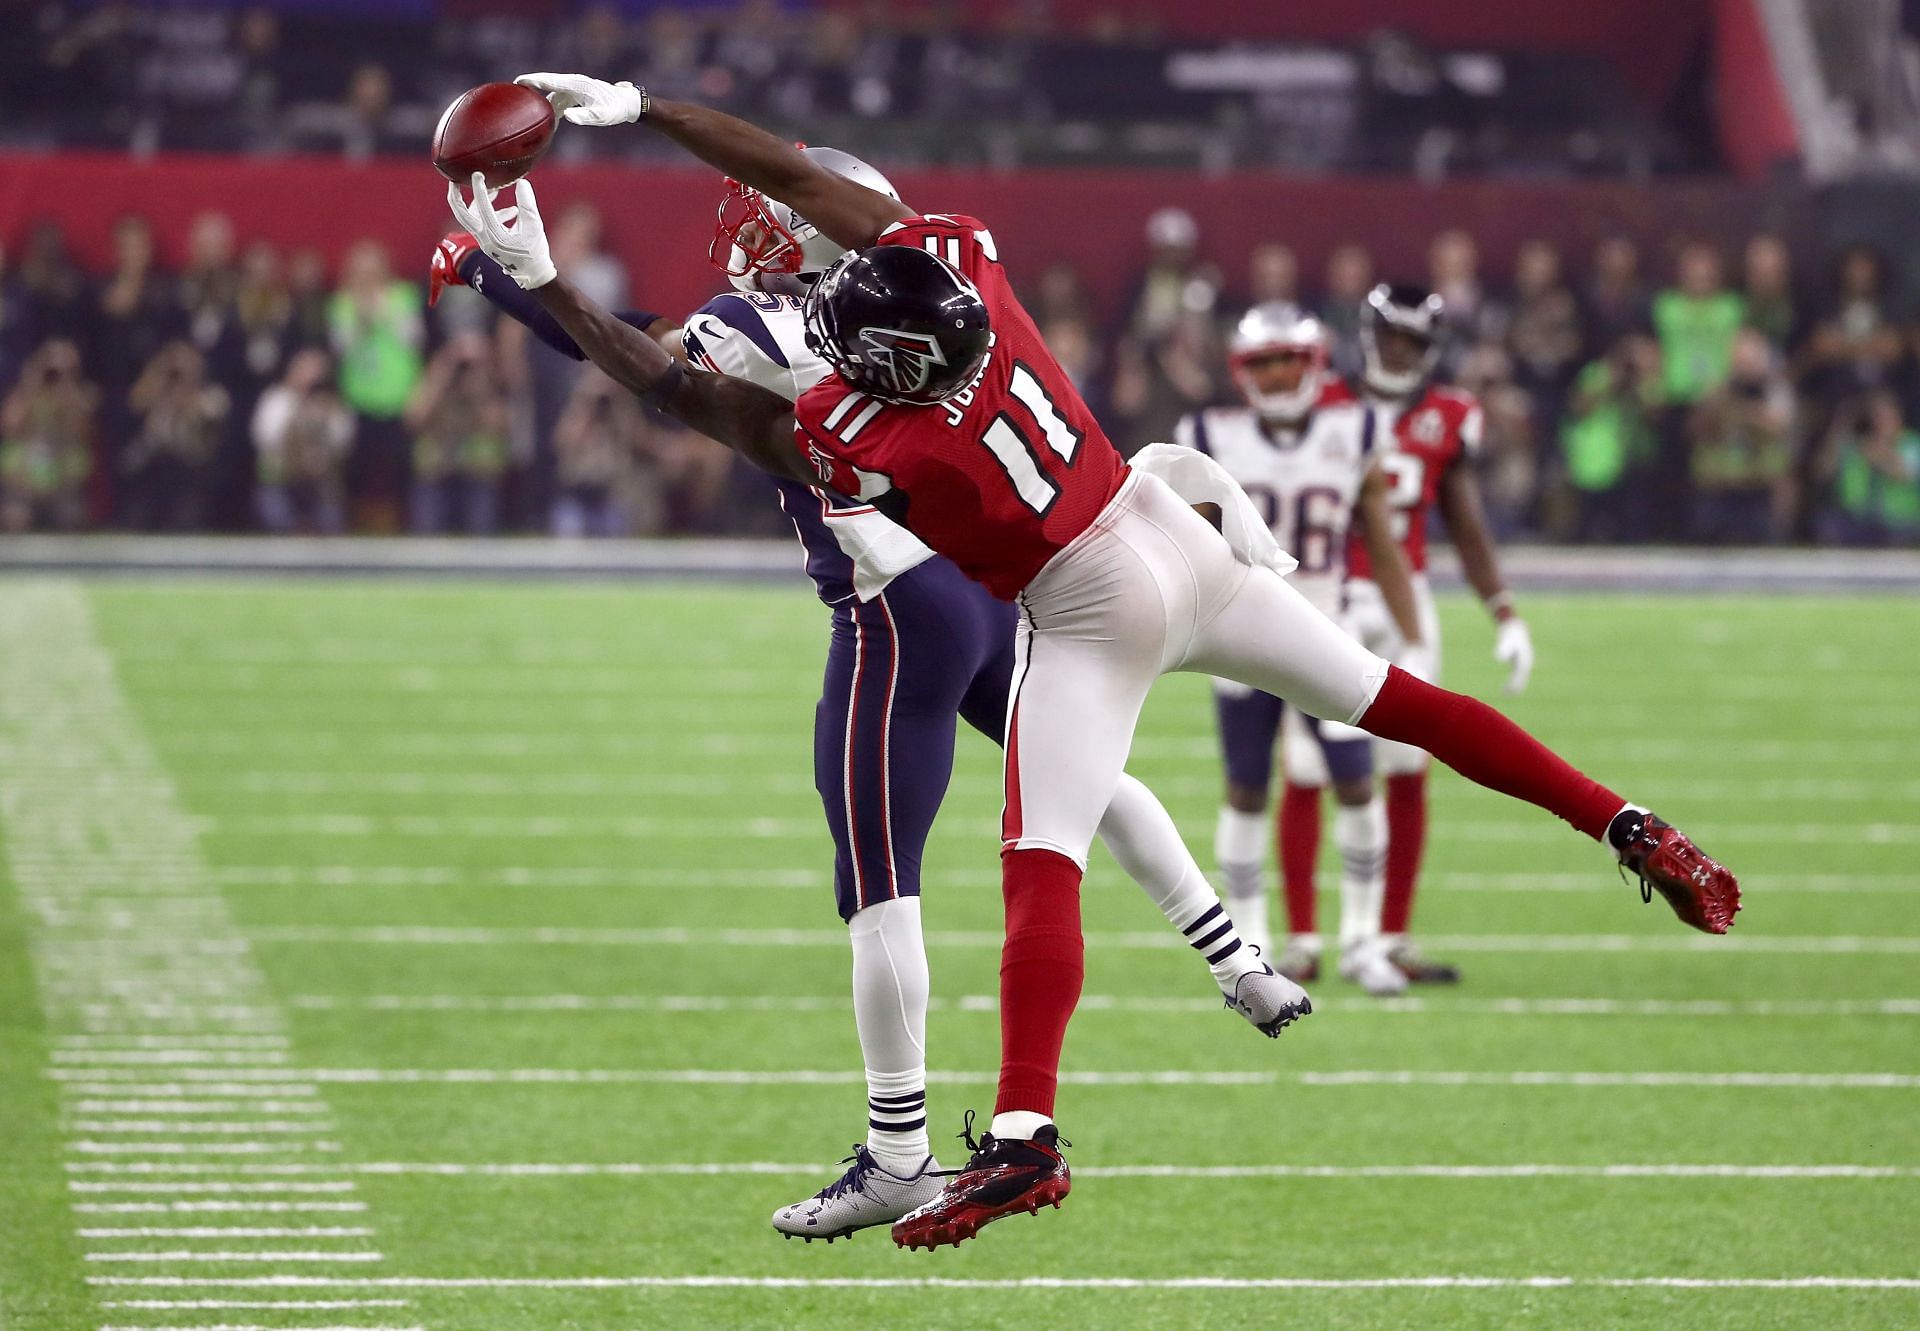 Julio Jones made a highlight-reel catch in a game Falcons fans want to forget